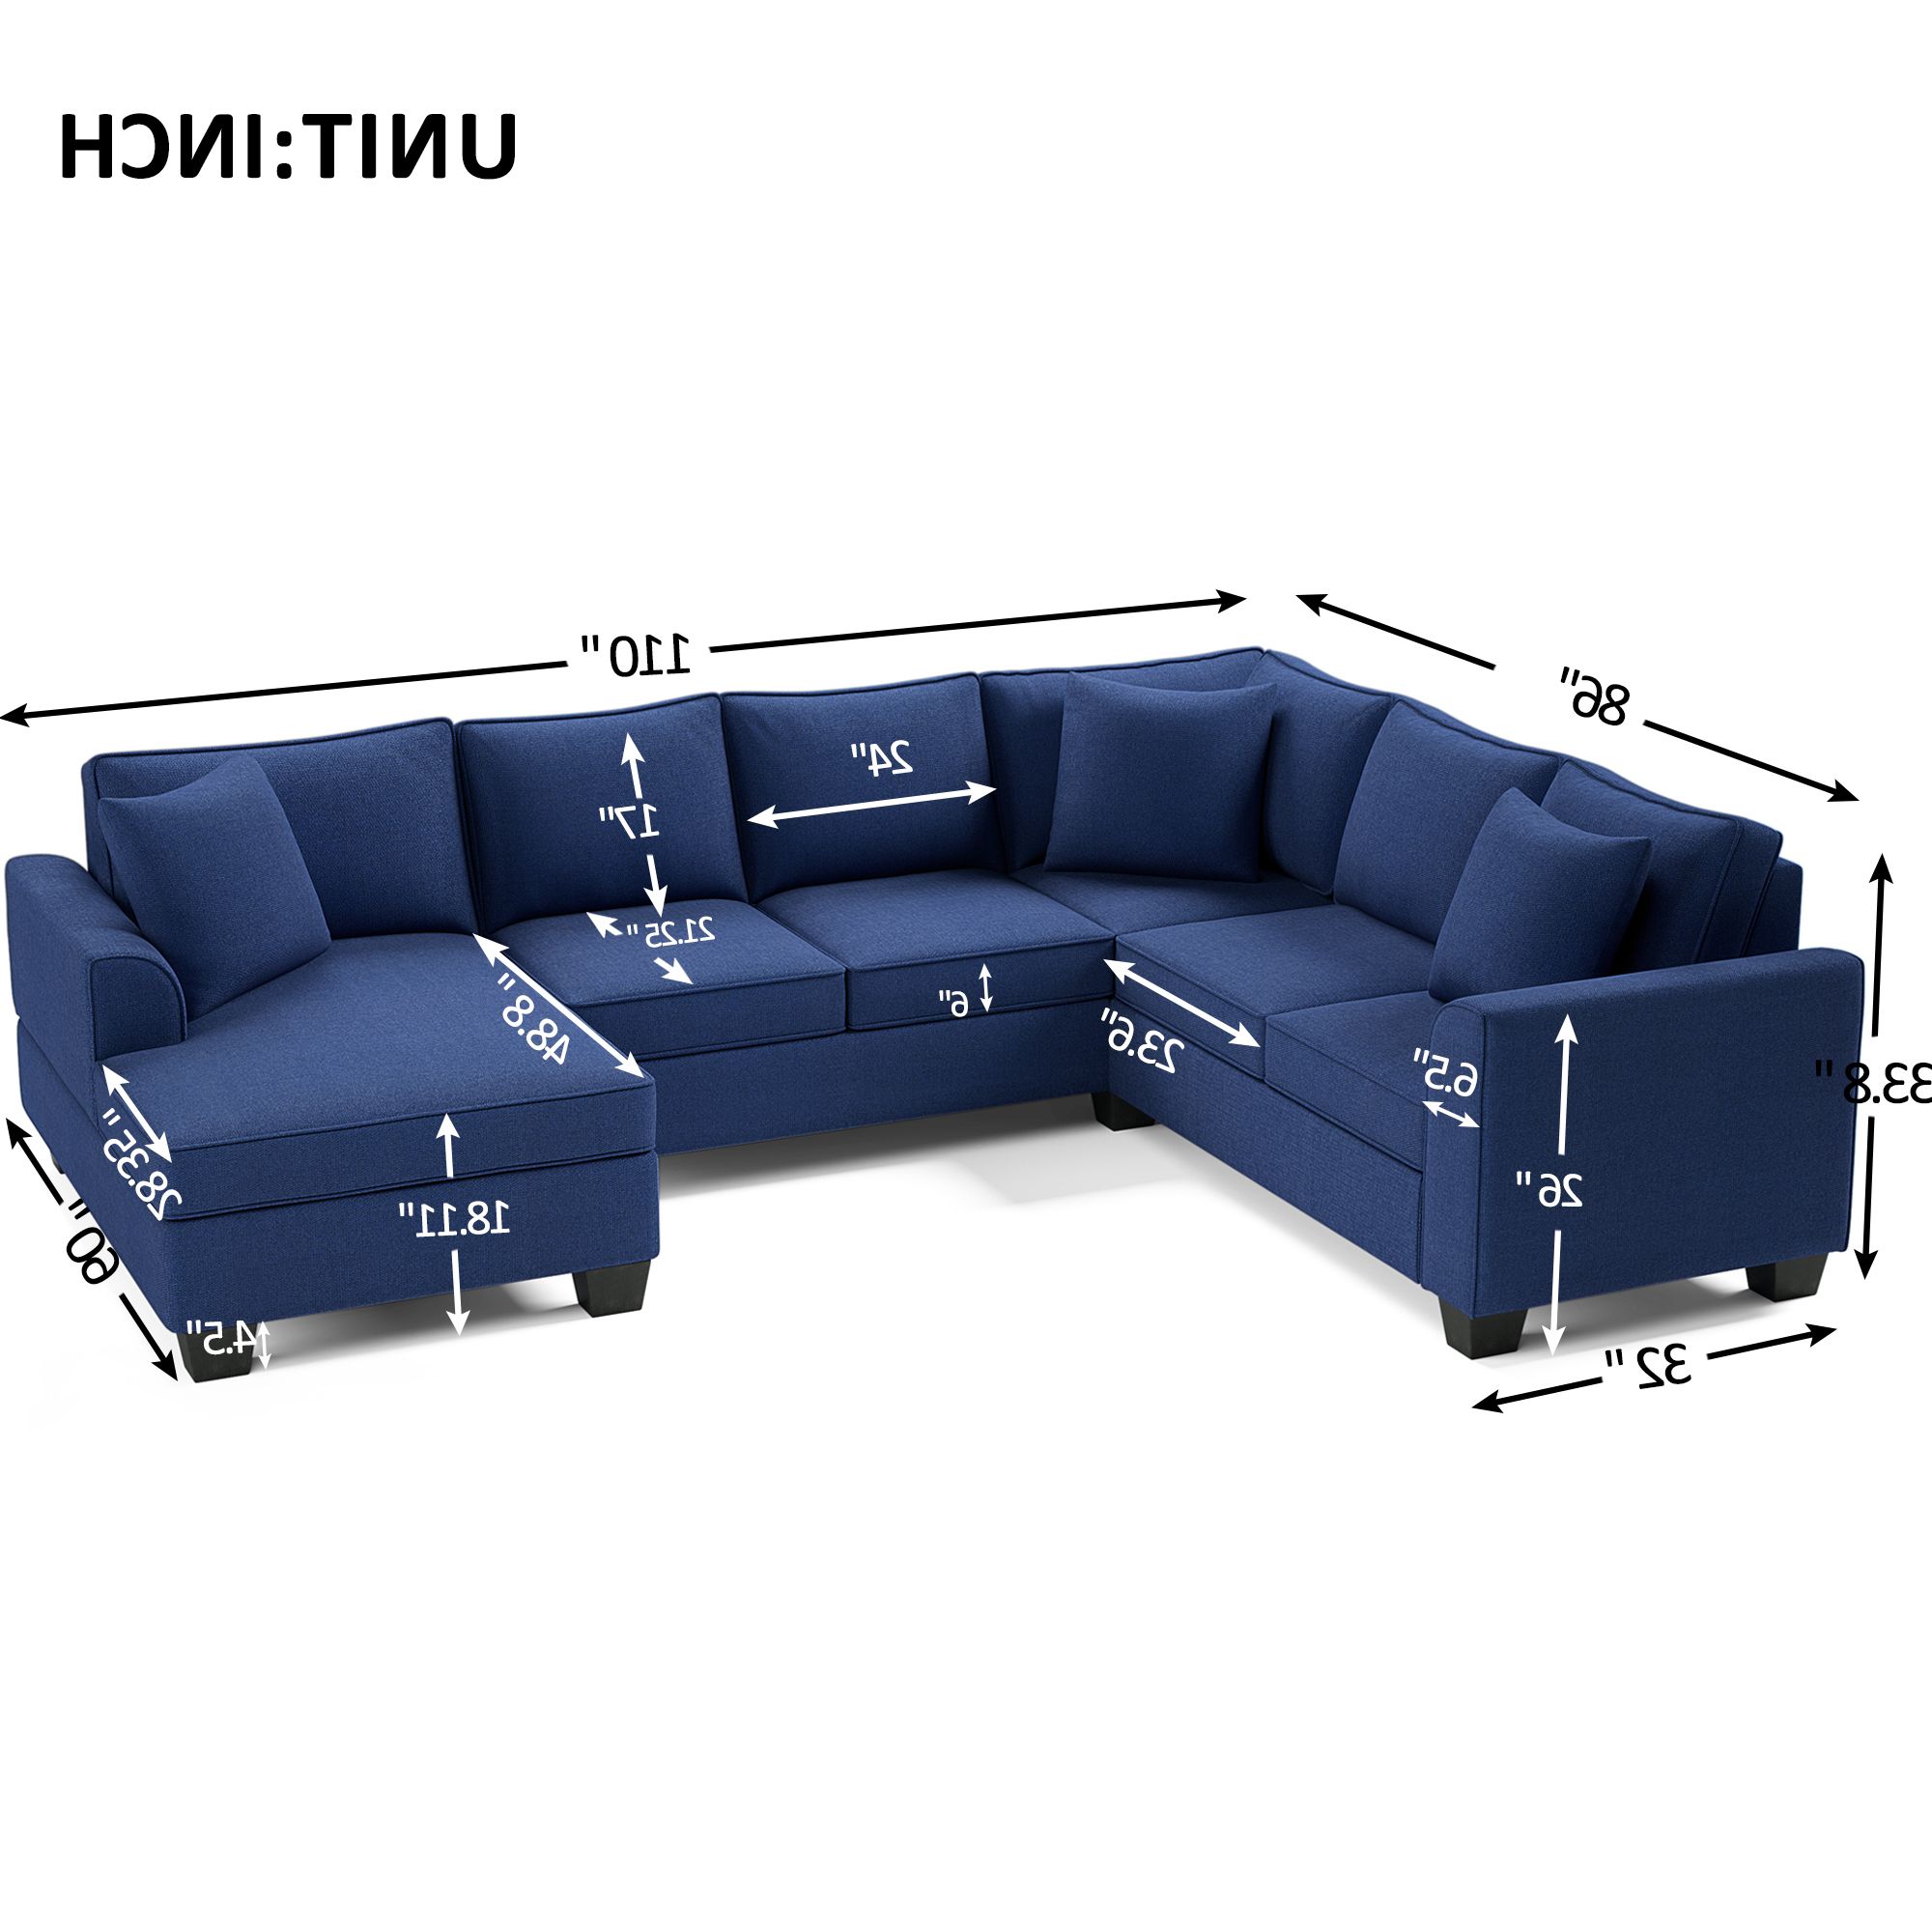 Modern 7 Seat Sectional Sofa, Polyester Sectional Sofas With 3 Pillows For  Living Room, 3 Colors – Walmart Pertaining To 7 Seater Sectional Couch With Ottoman And 3 Pillows (Gallery 18 of 20)